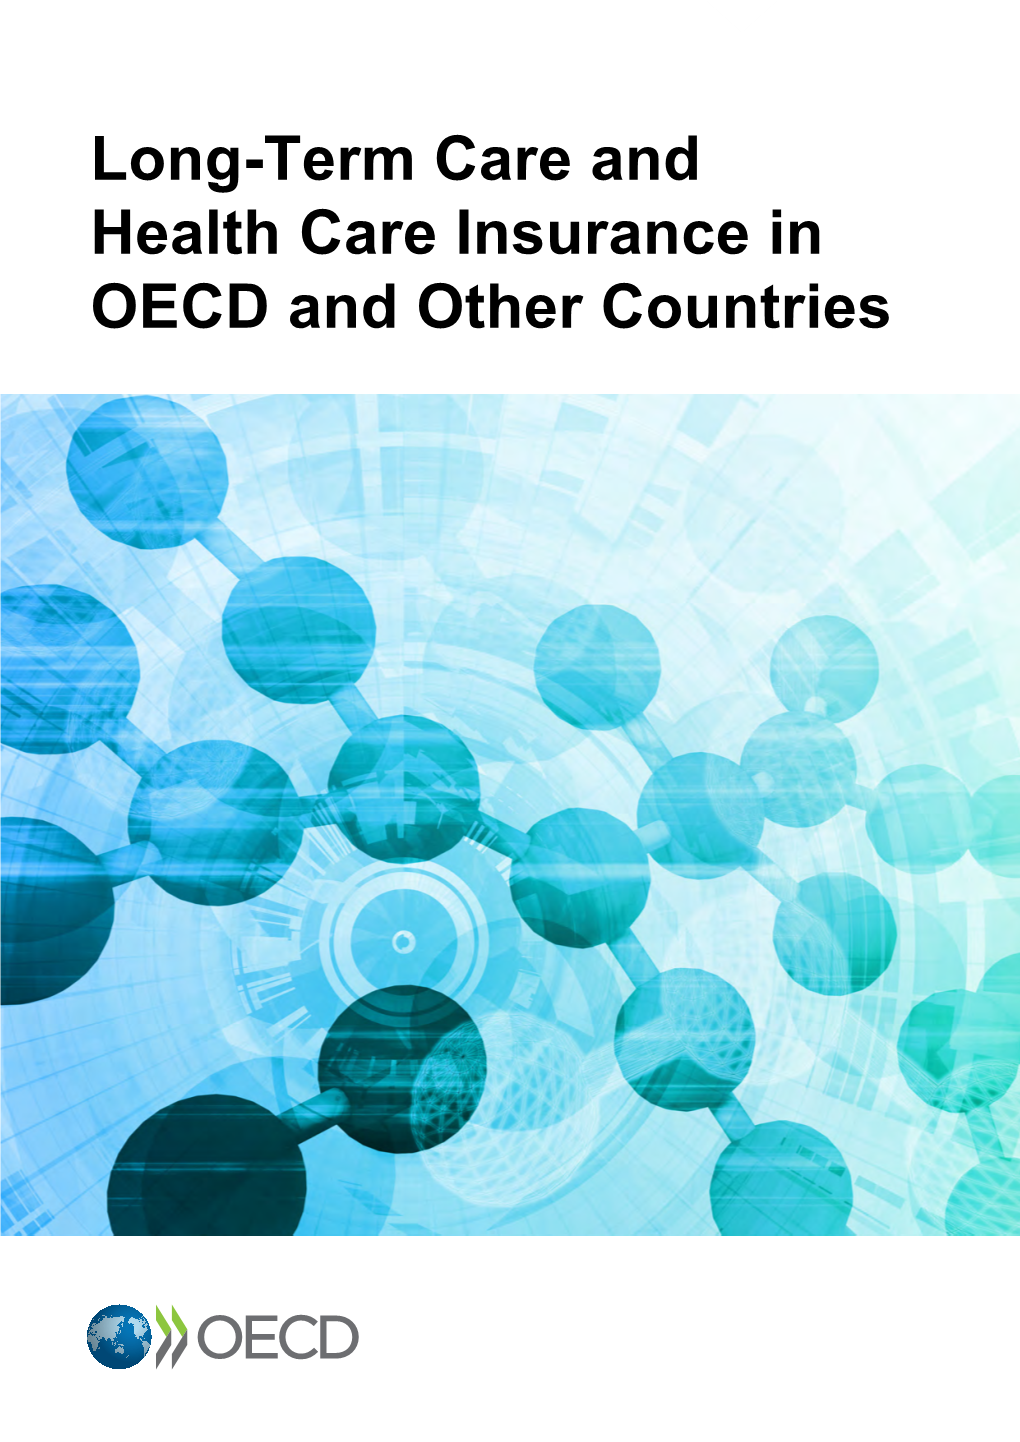 Long-Term Care and Health Care Insurance in OECD and Other Countries Please Cite This Publication As